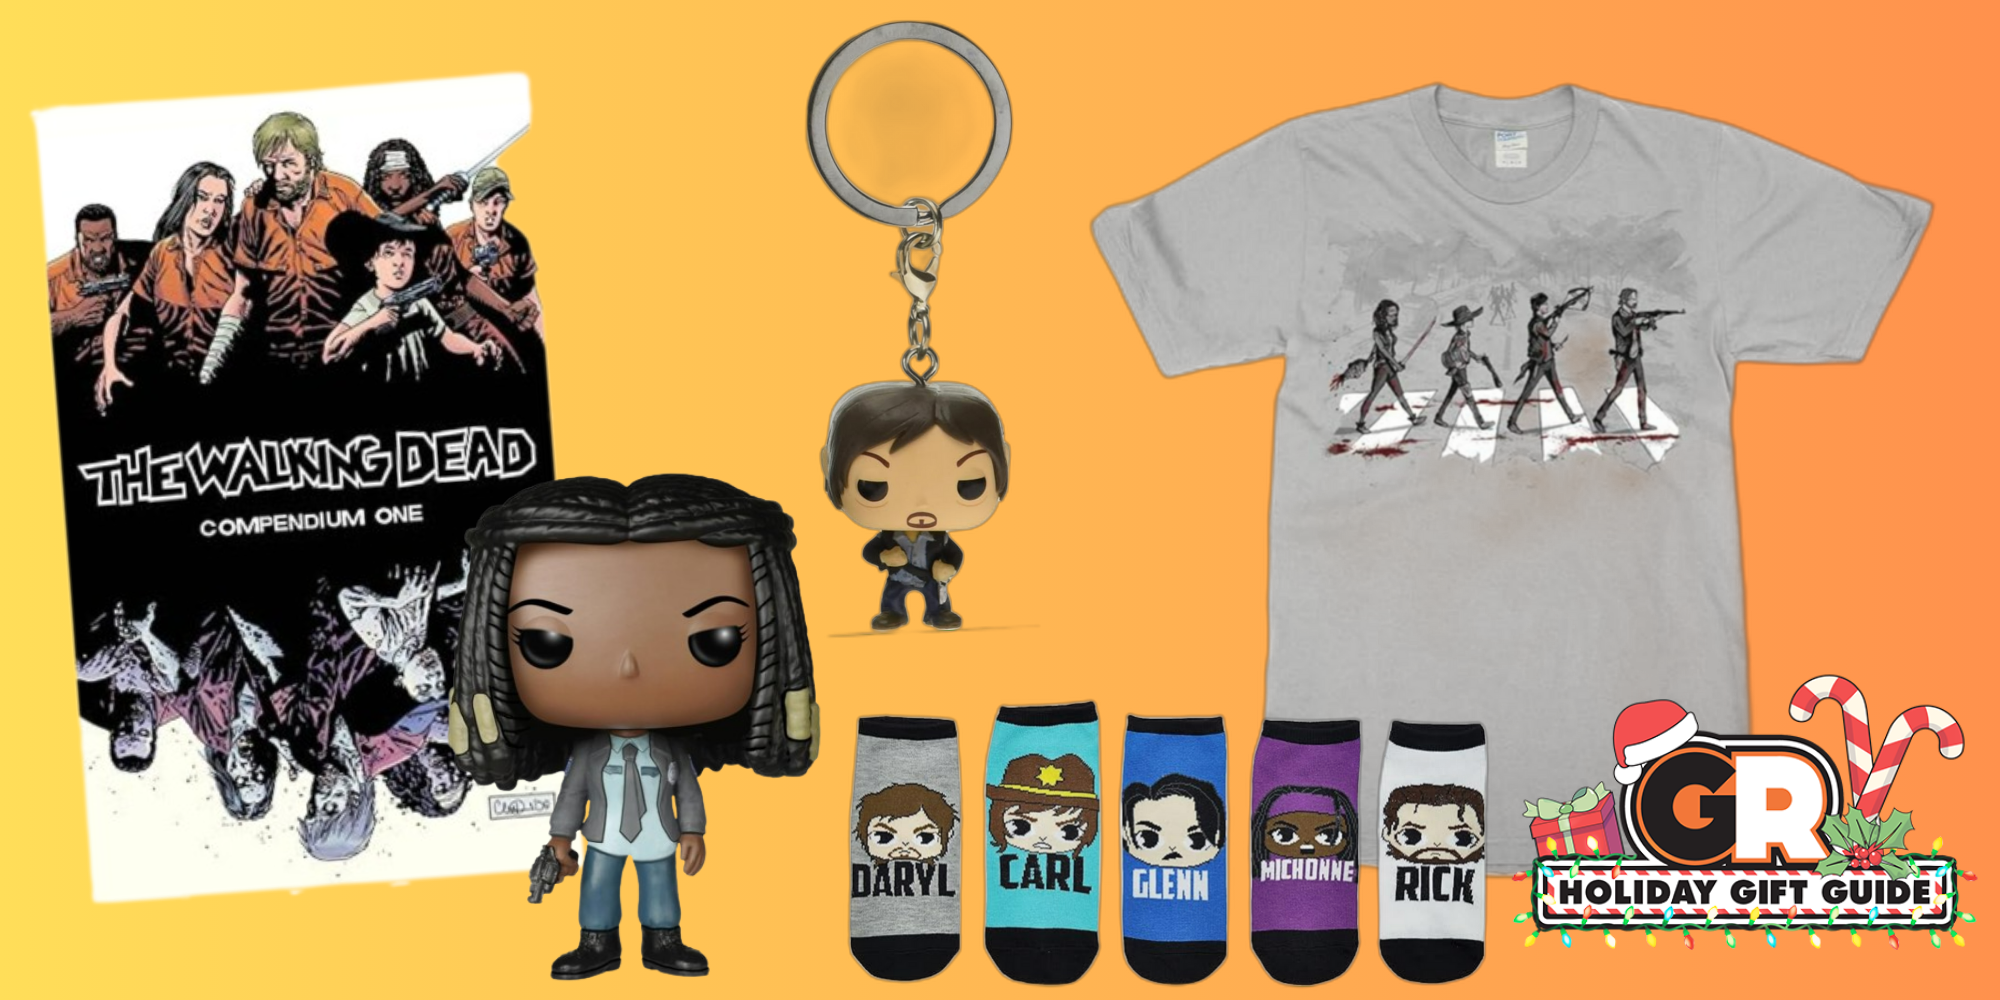 Various The Walking Dead related merchandise above a orange and yellow gradient background, with a game rant holiday gift guide logo.